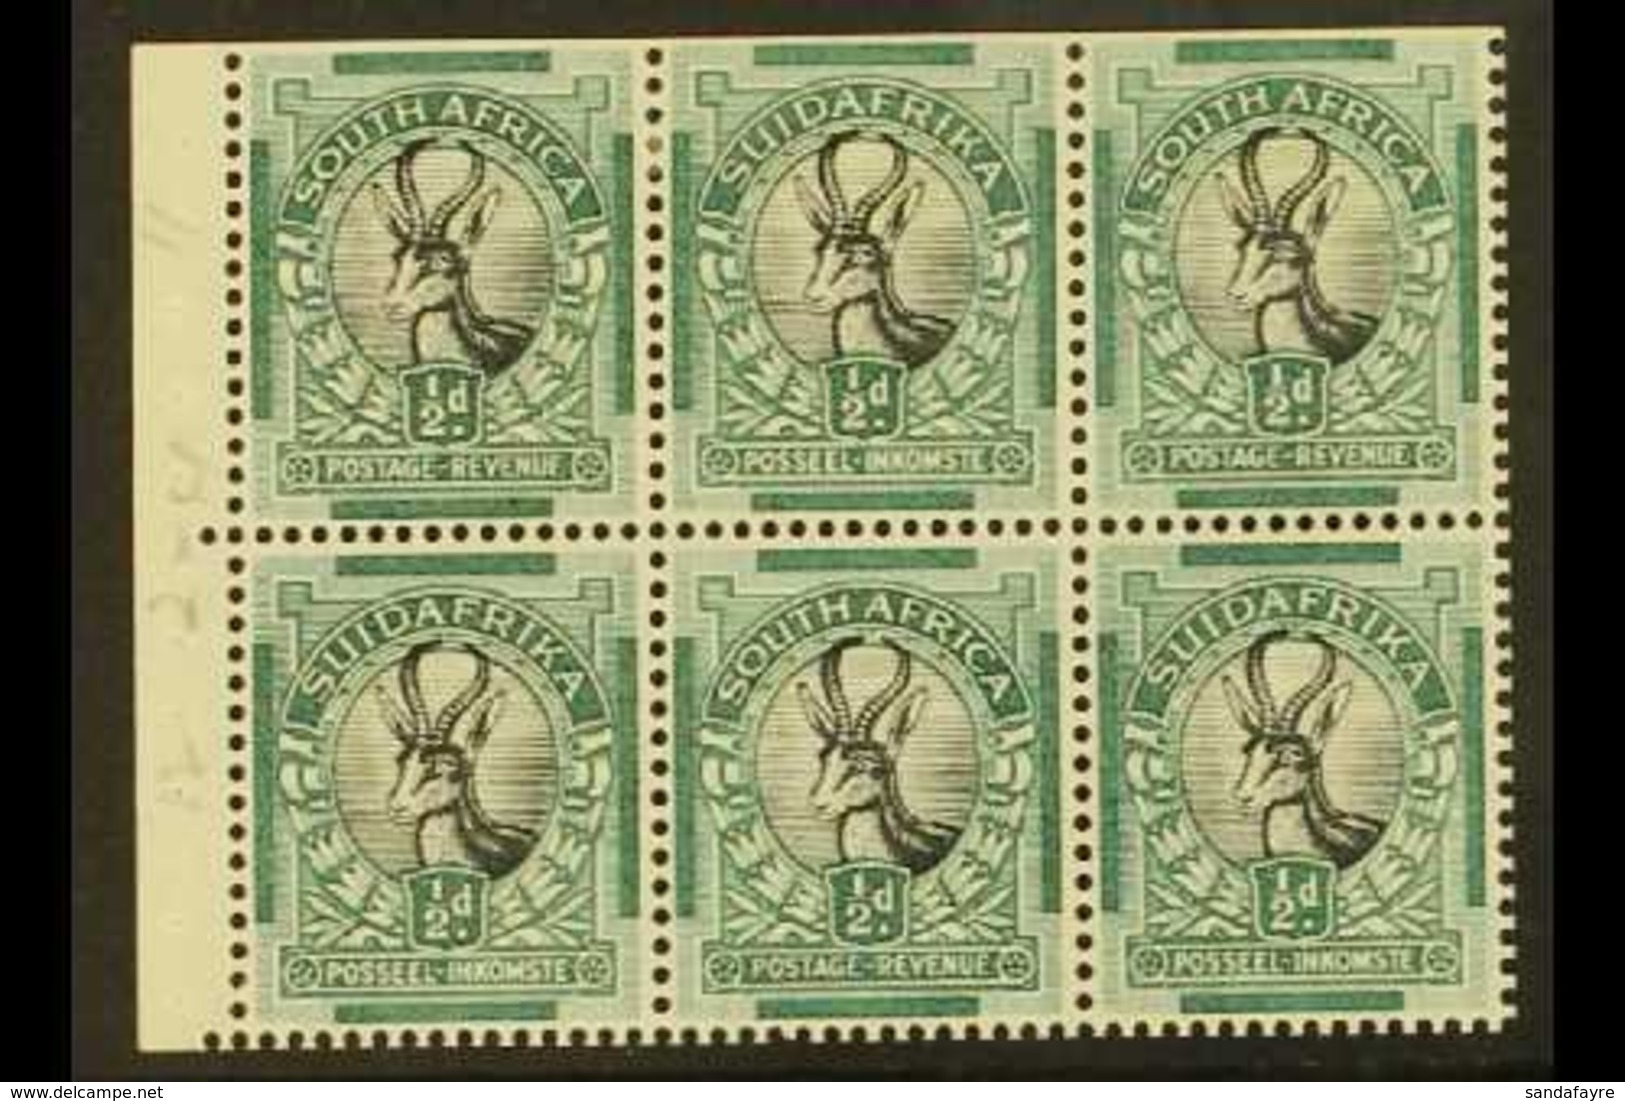 BOOKLET PANE 1930-1 ½d Watermark Upright, English Stamp First, COMPLETE PANE OF SIX from Rare 1930 2s6d Or 1931 3s Rotog - Unclassified